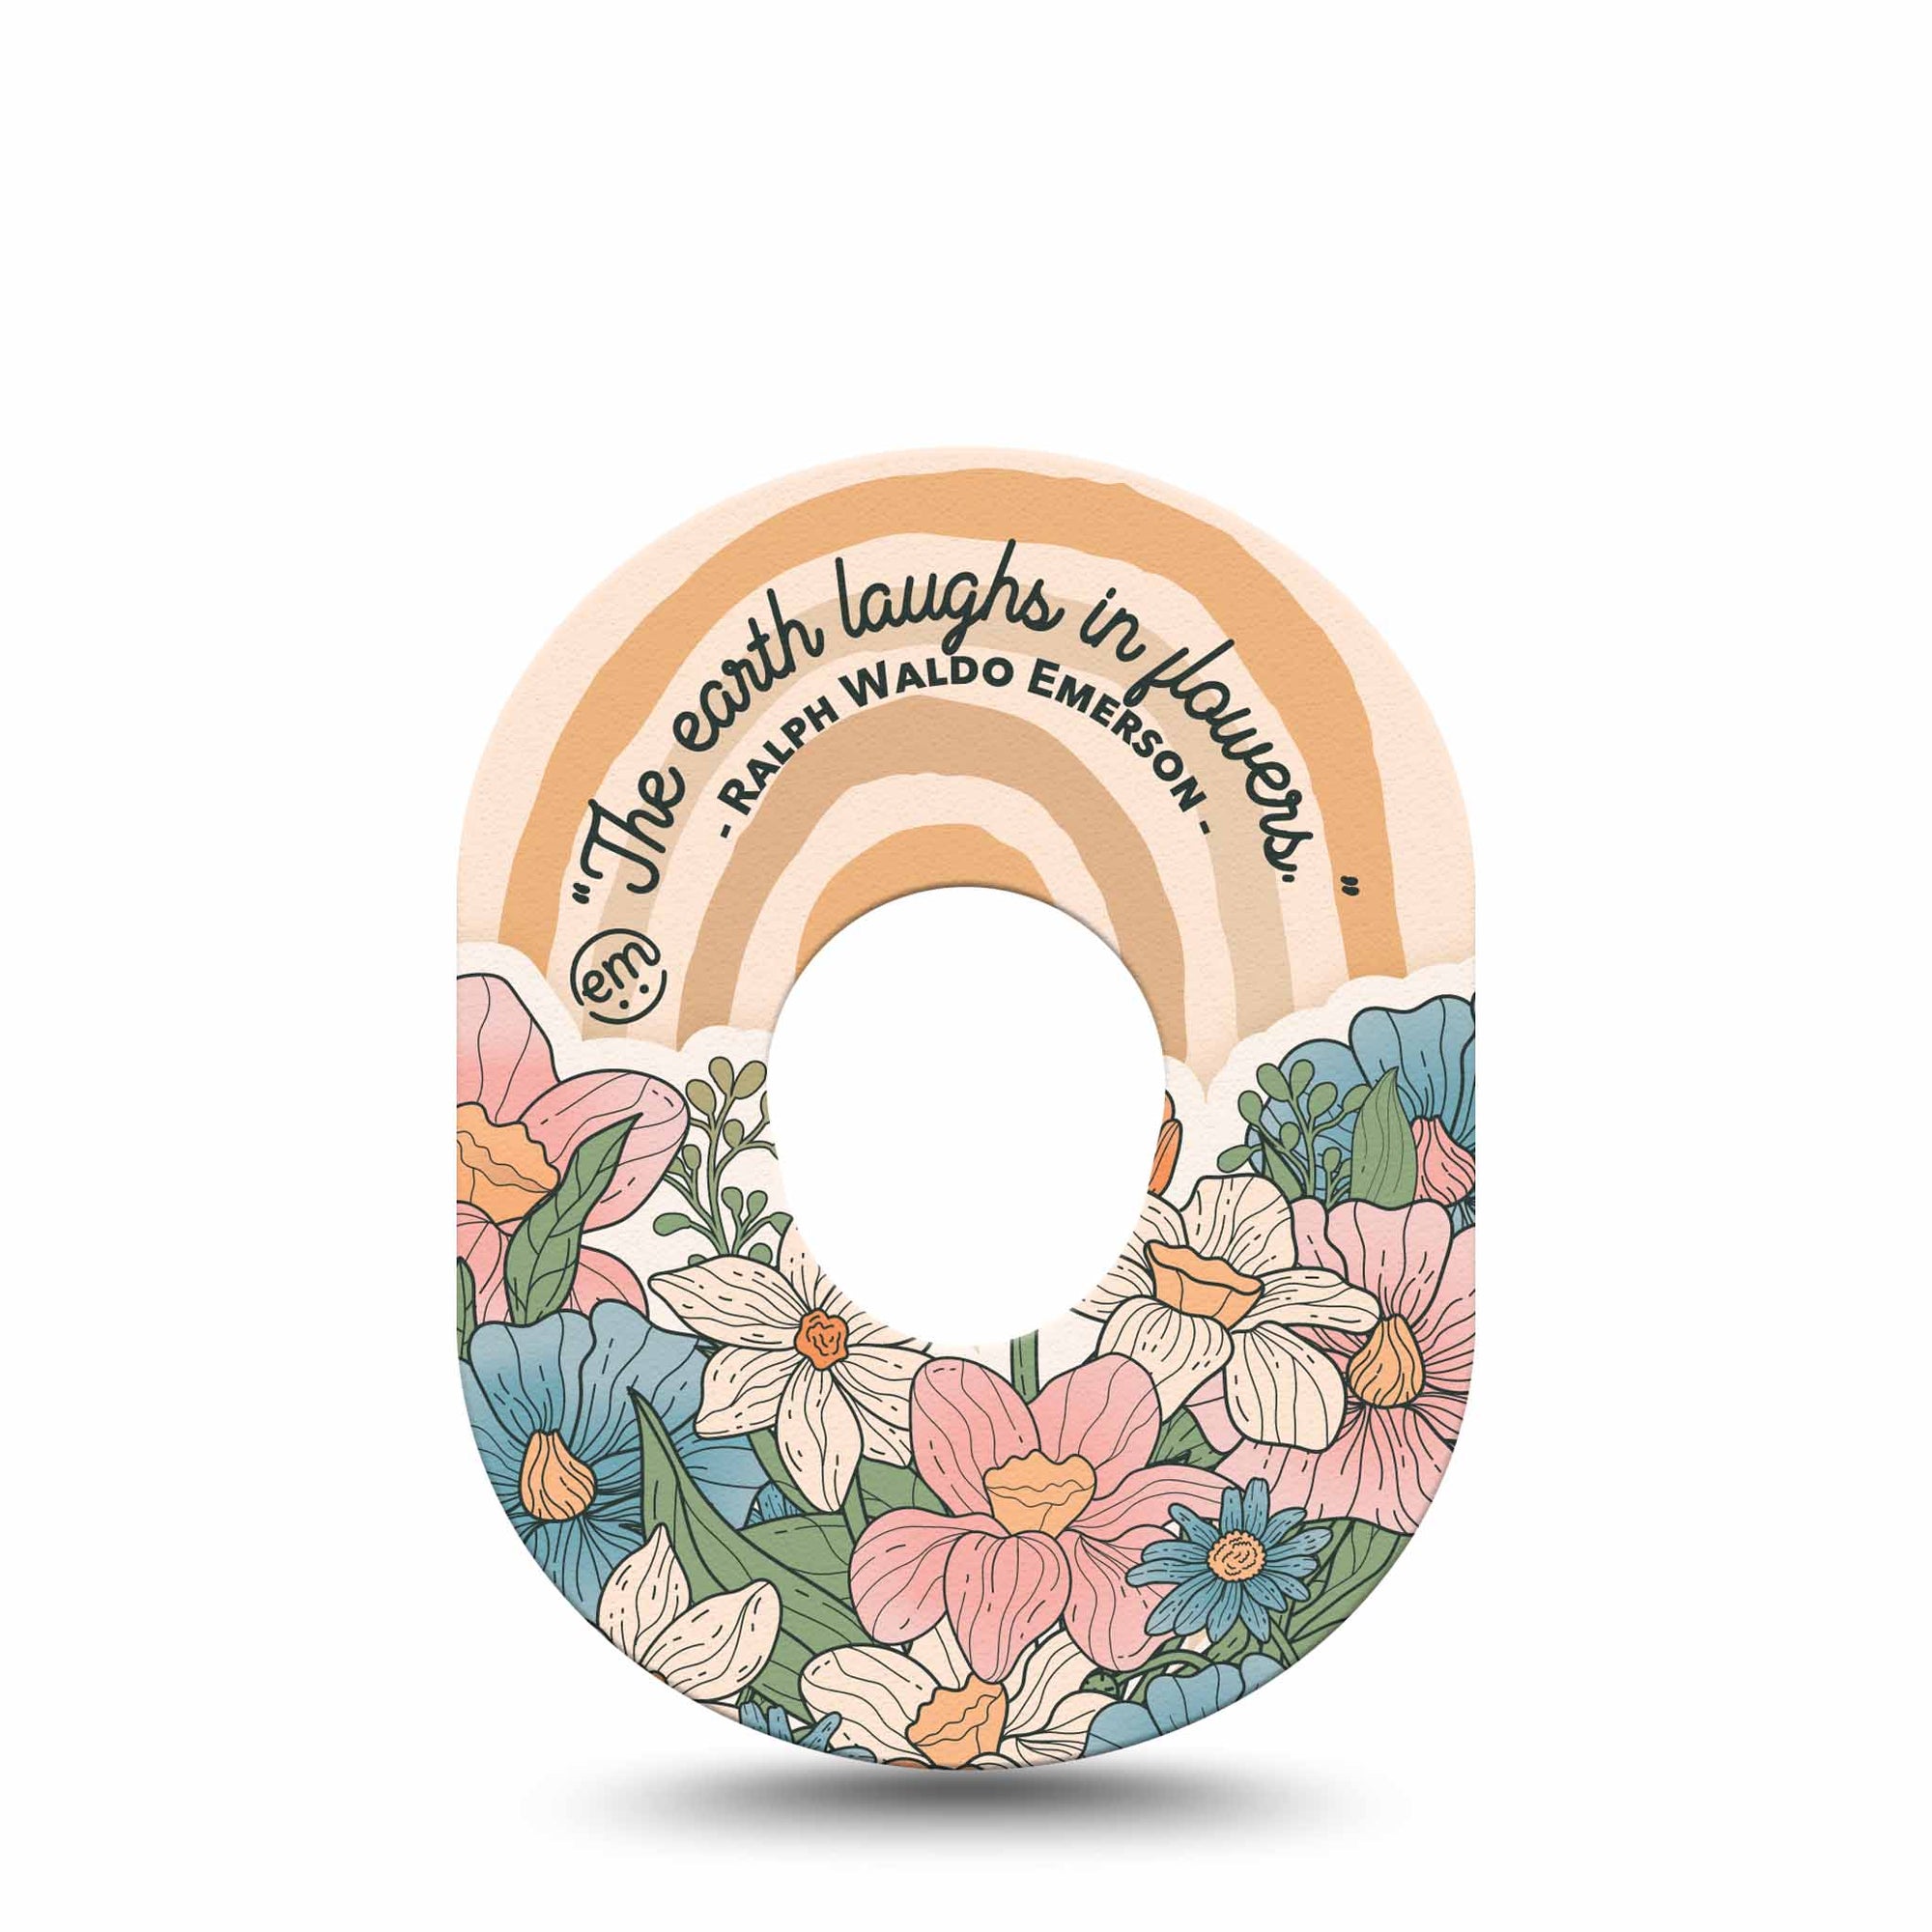 ExpressionMed Laughing Blooms Dexcom G7 Tape, Single, Neutral Color Inspired, CGM Adhesive Patch Design, Dexcom Stelo Glucose Biosensor System